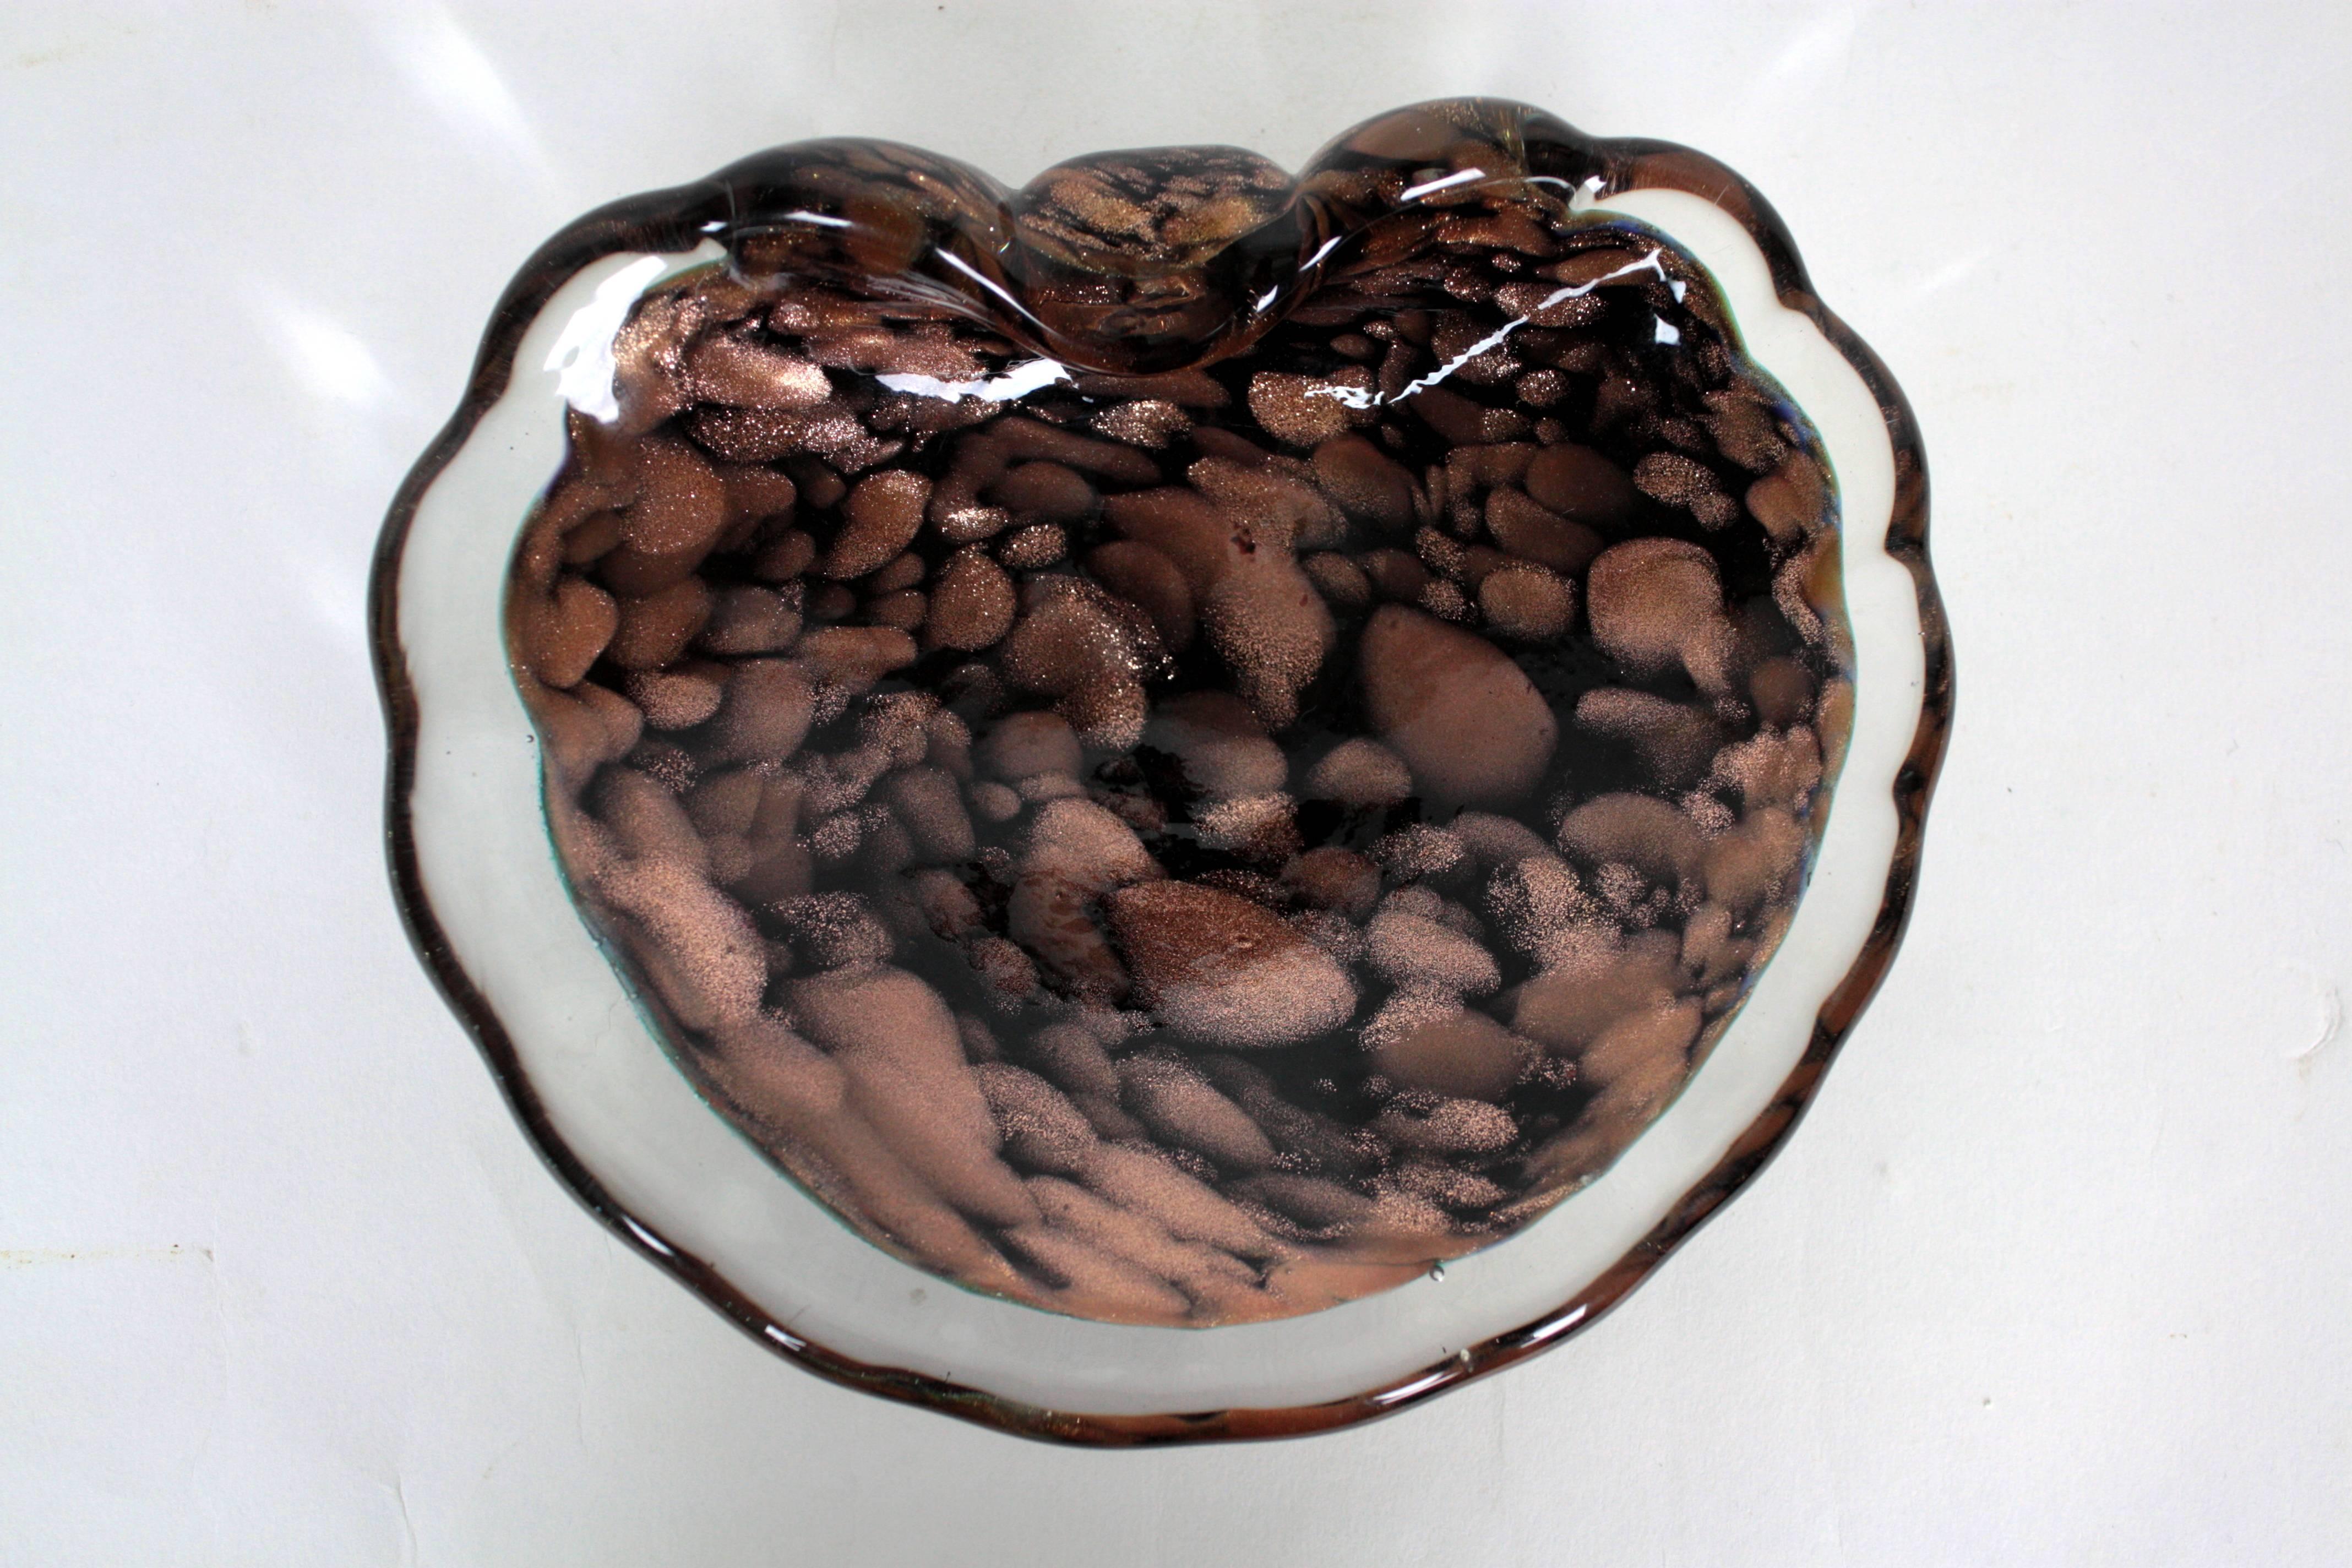 Whimsical scalloped shell bowl by Vincenzo Nason.

Vincenco Nason worked for Venini glass before he established his art glass company. The use of black glass and copper aventurine is the identity sign of the company.